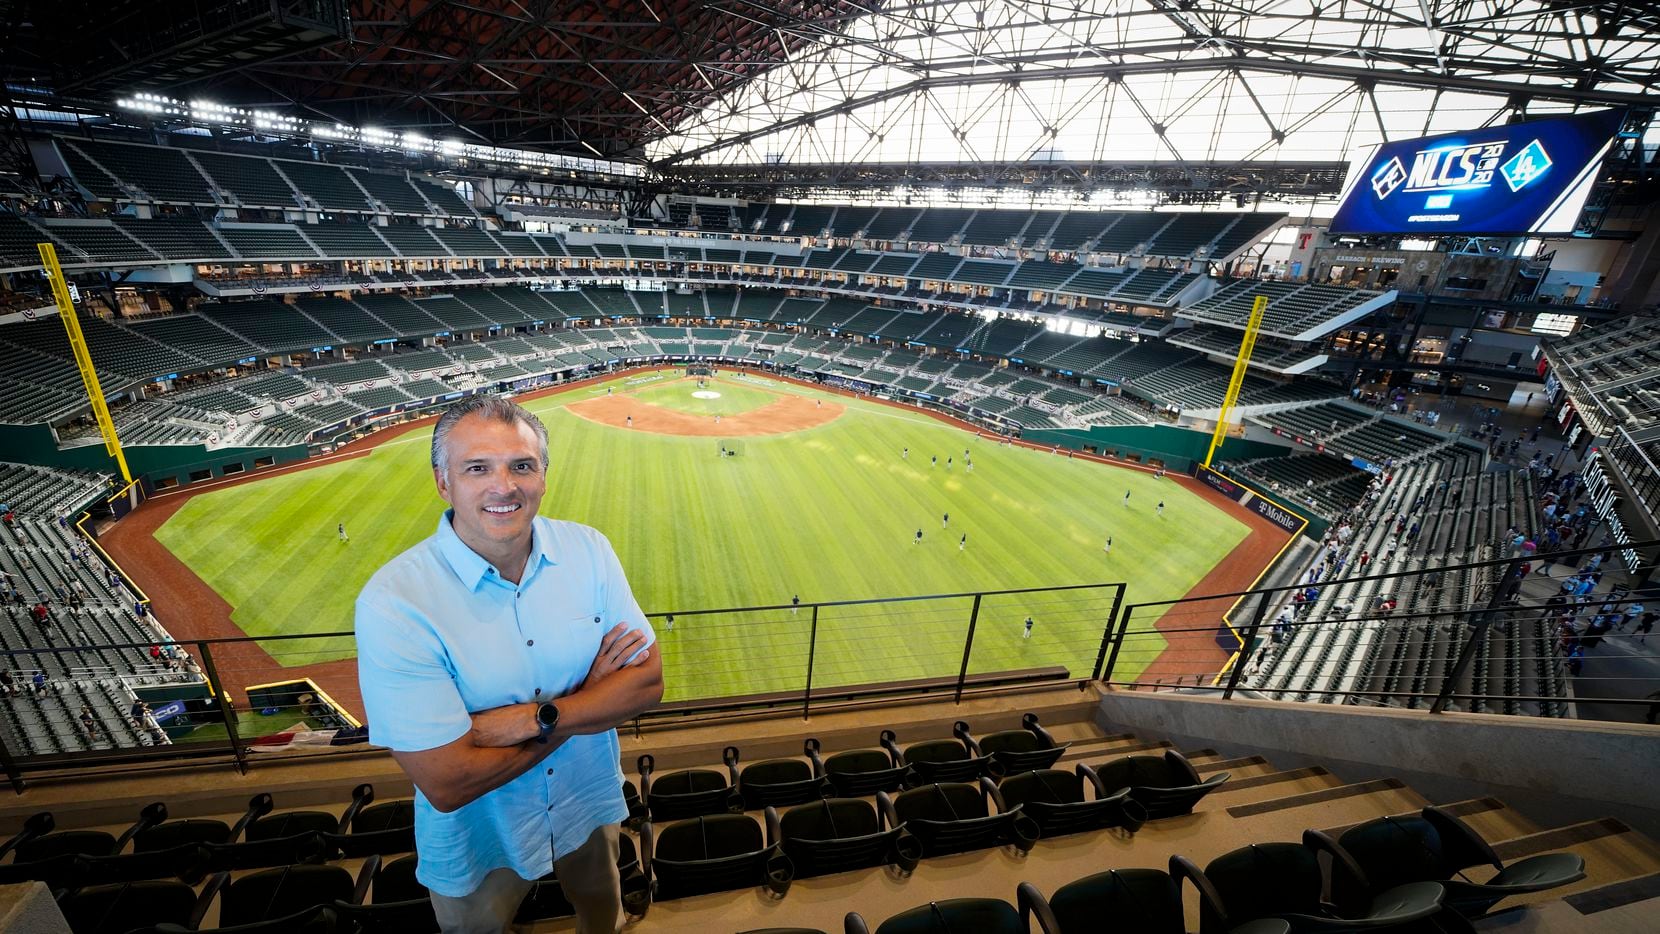 Like Globe Life Field, the story of Fred Ortiz, the stadium's lead  designer, has some pleasant surprises